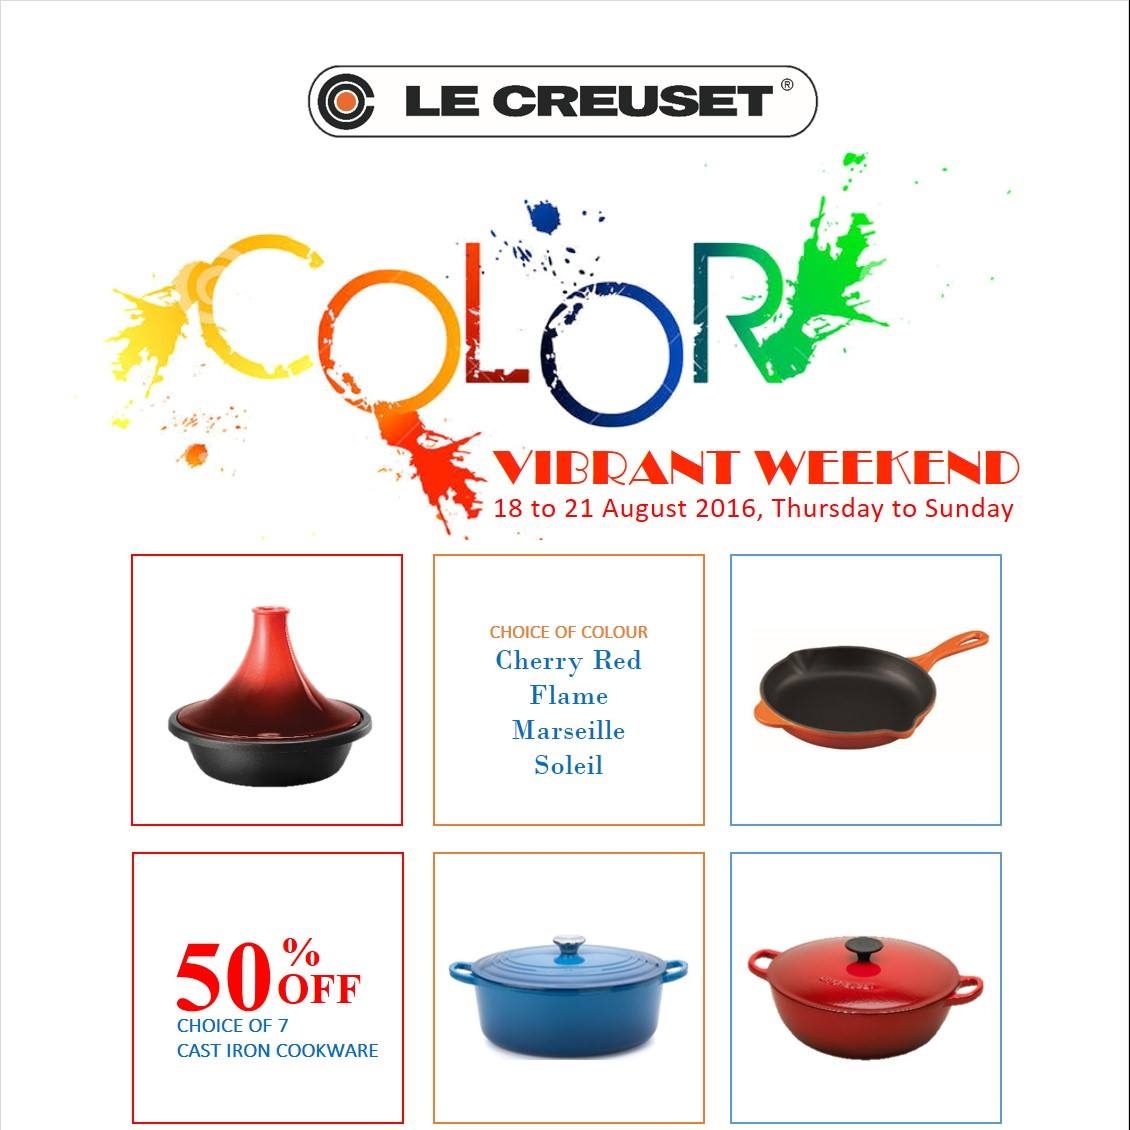 Le Creuset Singapore Vibrant Weekend Special Up to 50% Off Promotion 18 to 21 Aug 2016